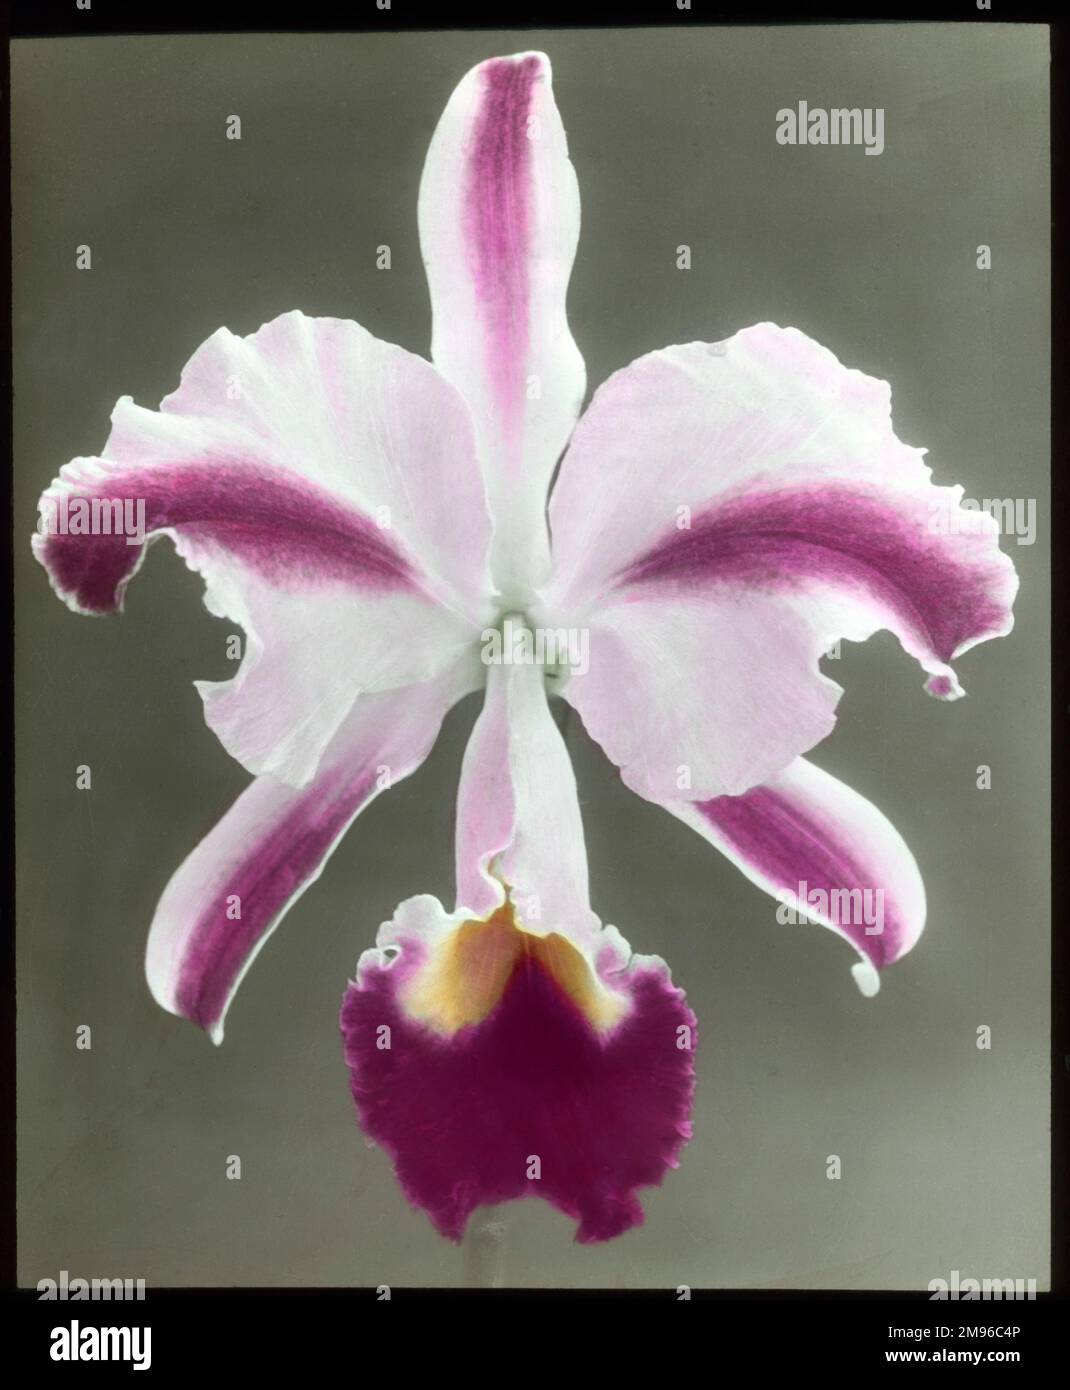 Cattleya Trianae 'Mrs Phillips', also known as Flor de Mayo (May Flower) or Christmas Orchid (Orchidaceae family), with pink, purple and yellow colouring. Stock Photo